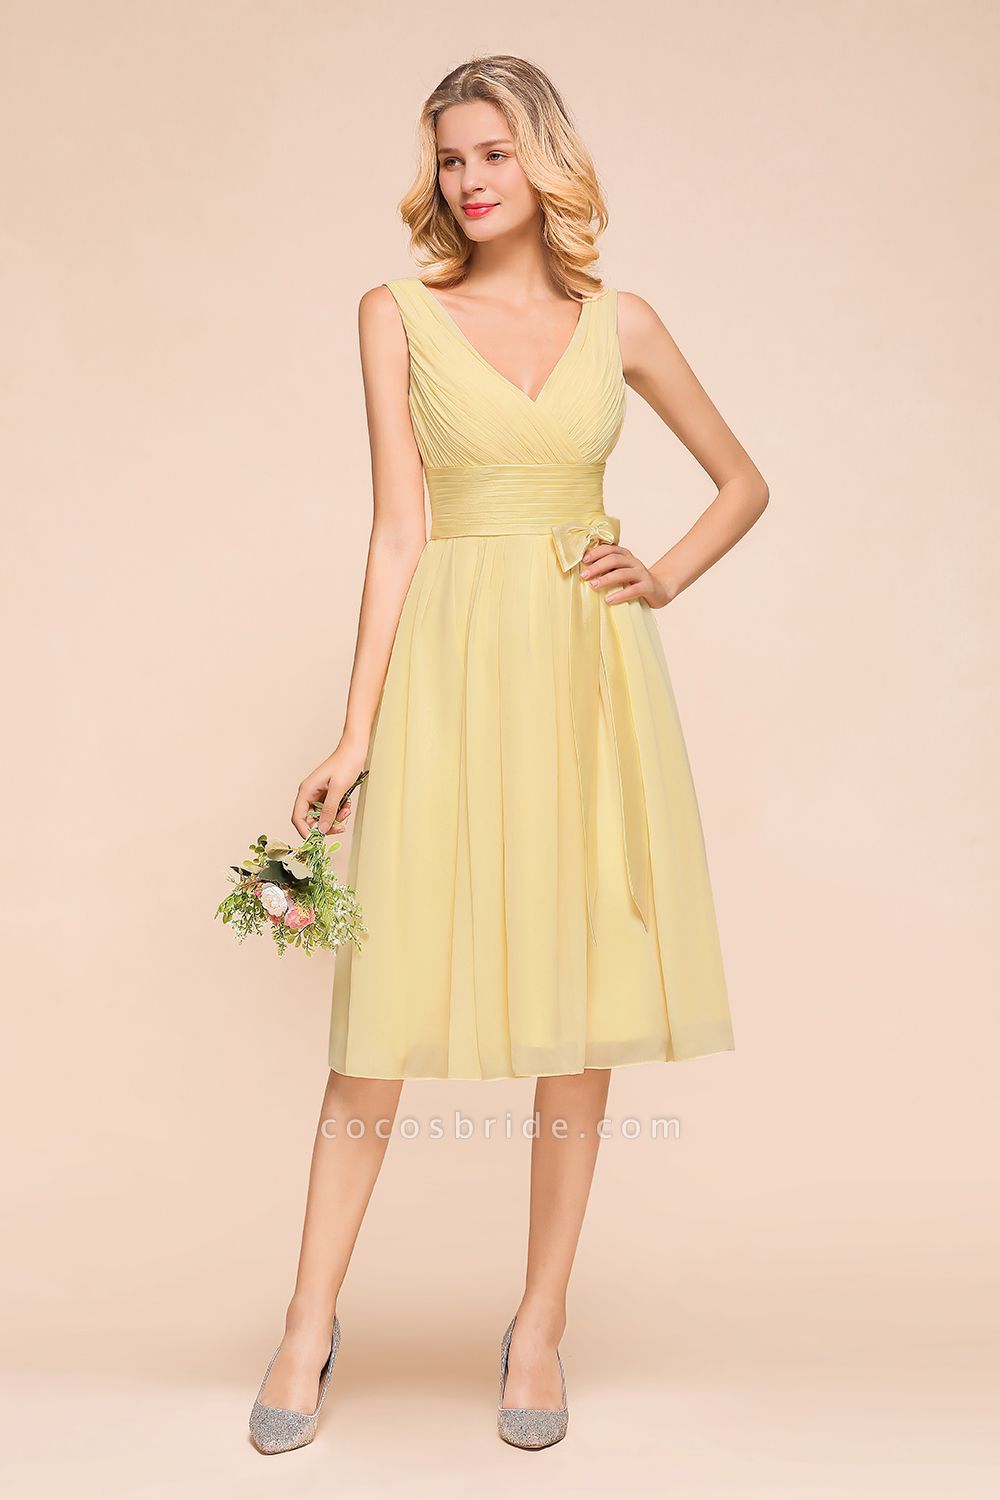 Classy Wide Straps V-neck A-line Knee-length Chiffon Bridesmaid Dress With Bowknot